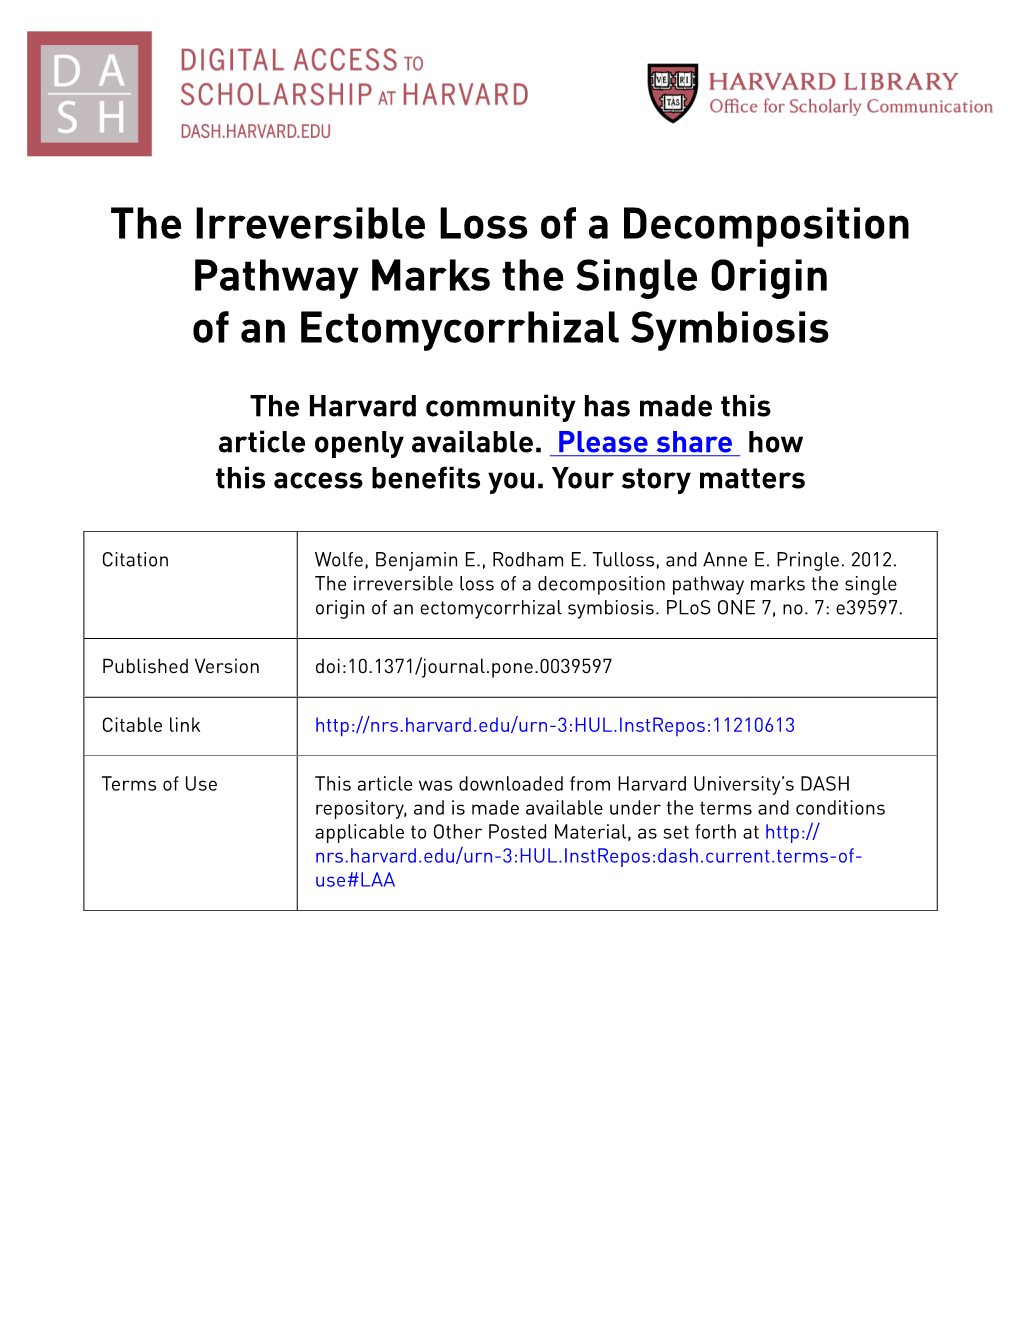 The Irreversible Loss of a Decomposition Pathway Marks the Single Origin of an Ectomycorrhizal Symbiosis